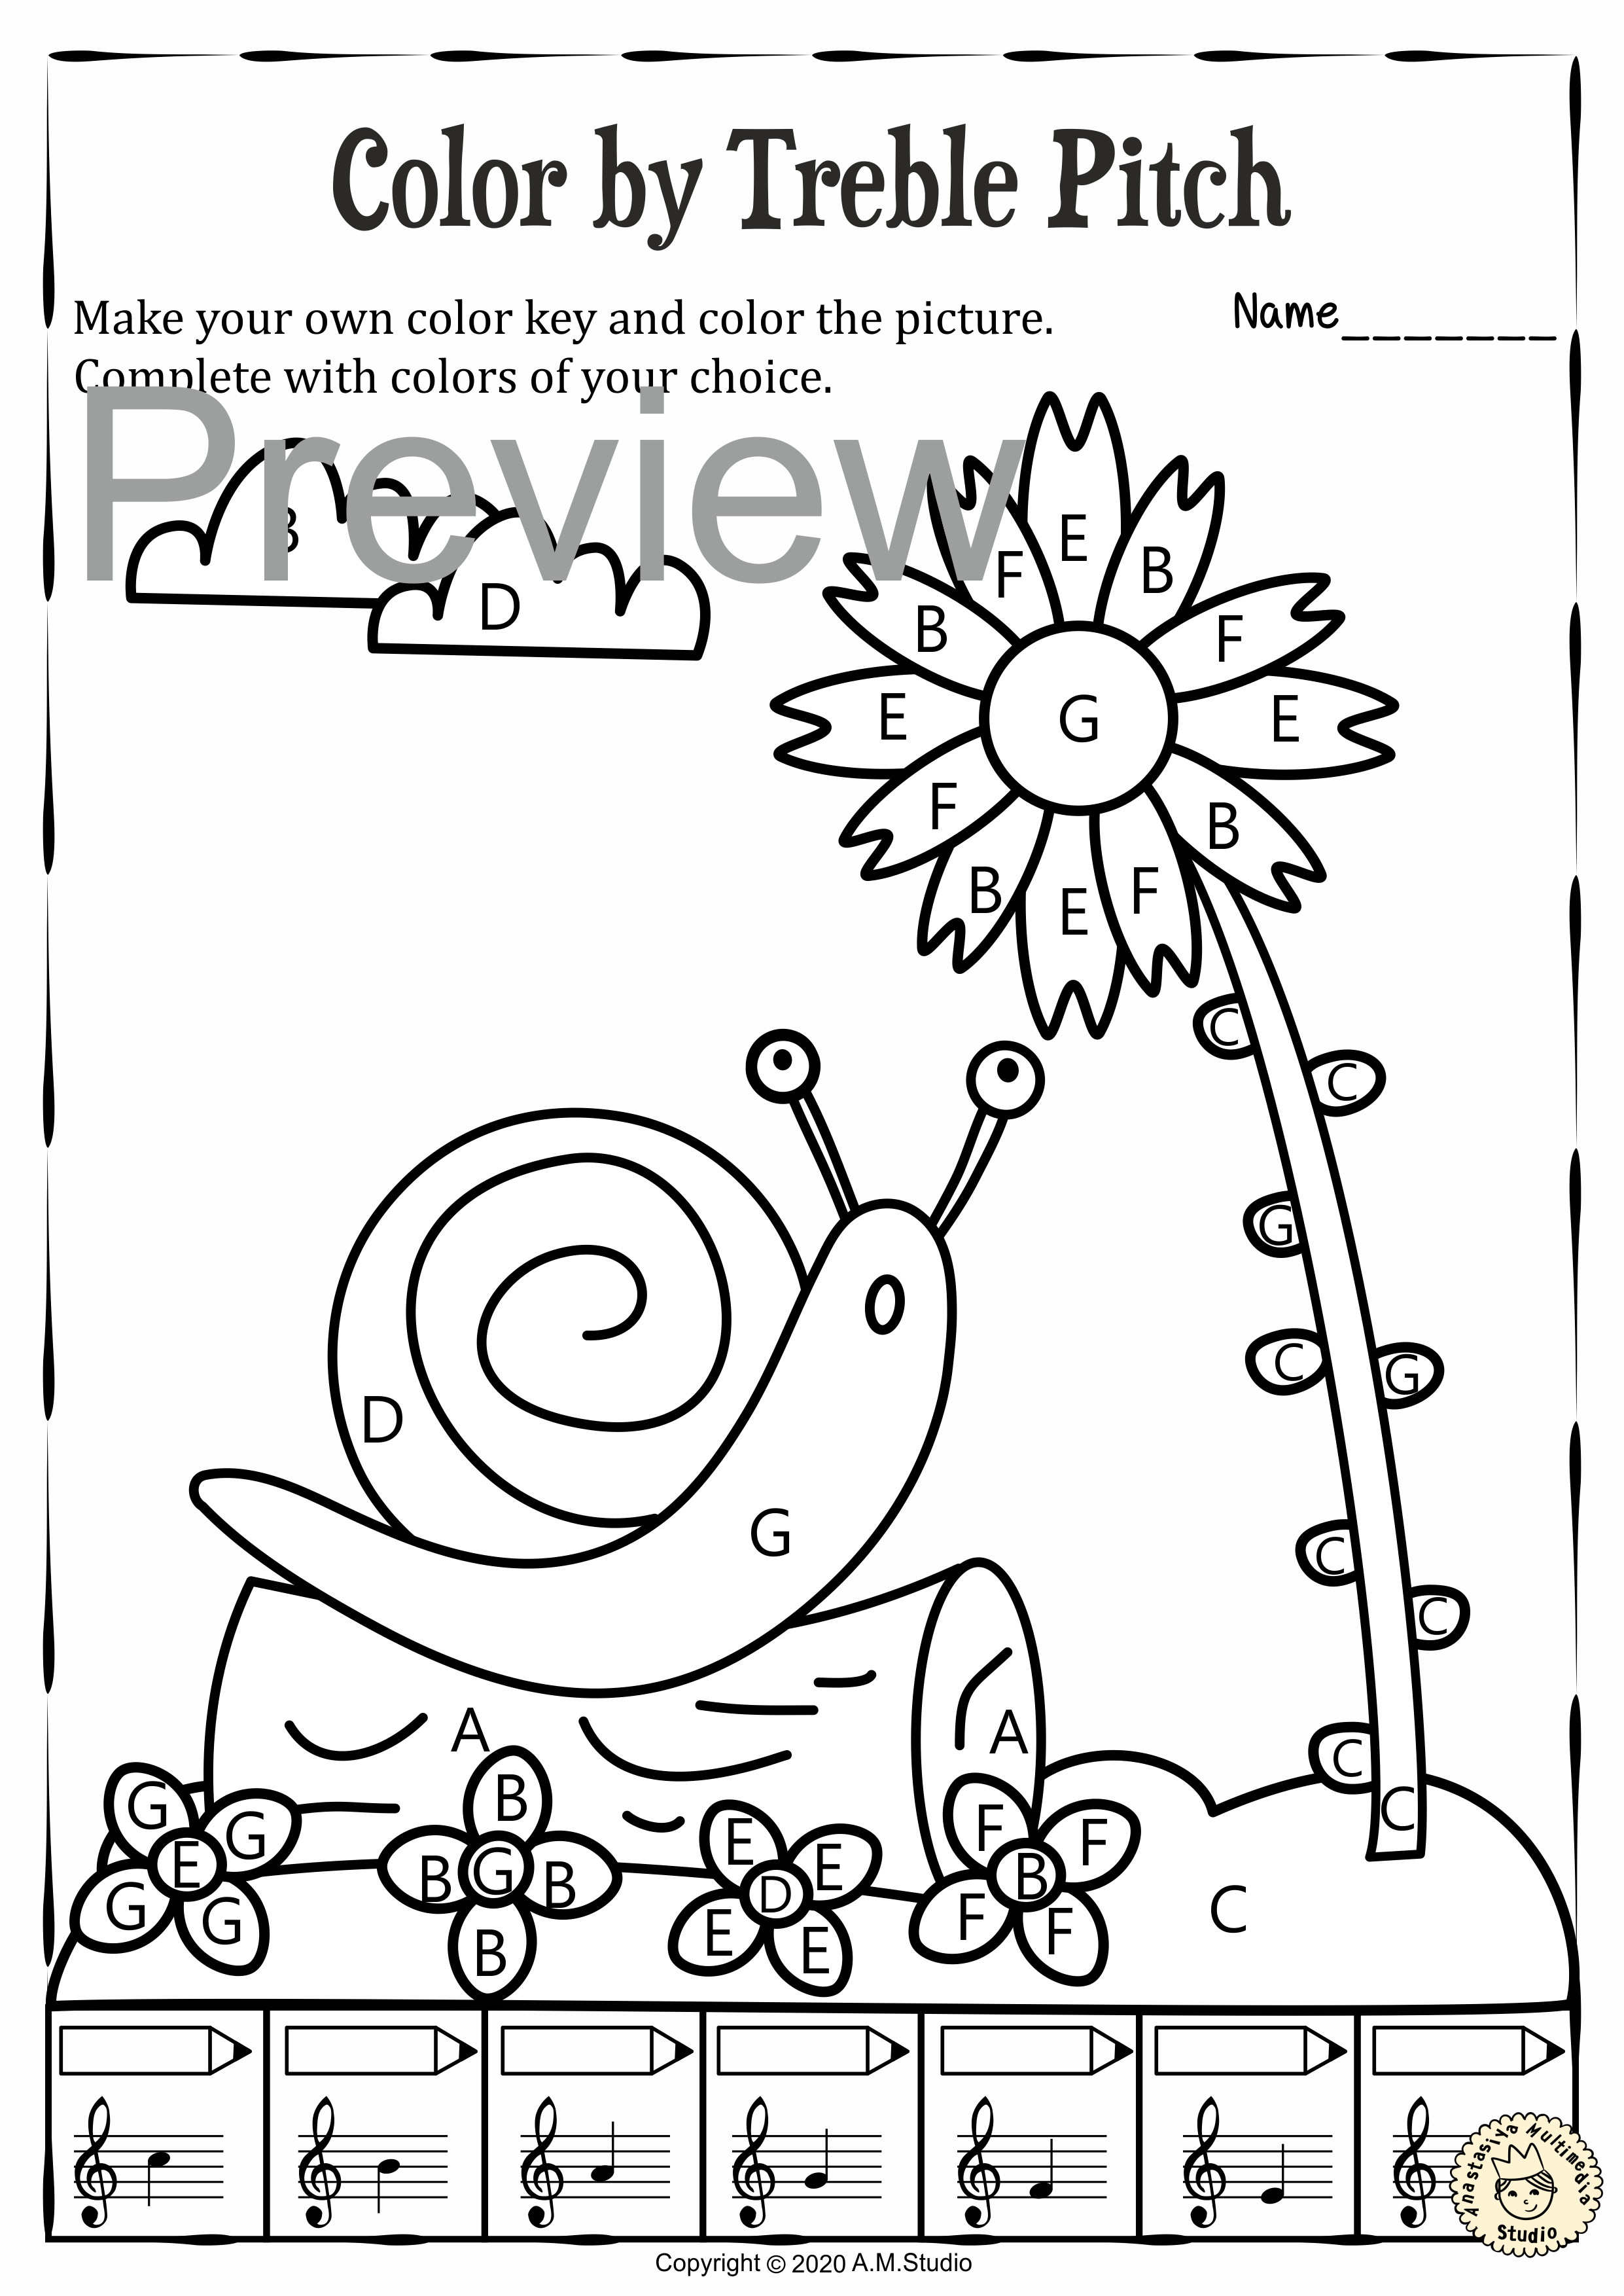 Musical Coloring Pages for Spring {Color by Treble Pitch} with answers (img # 3)